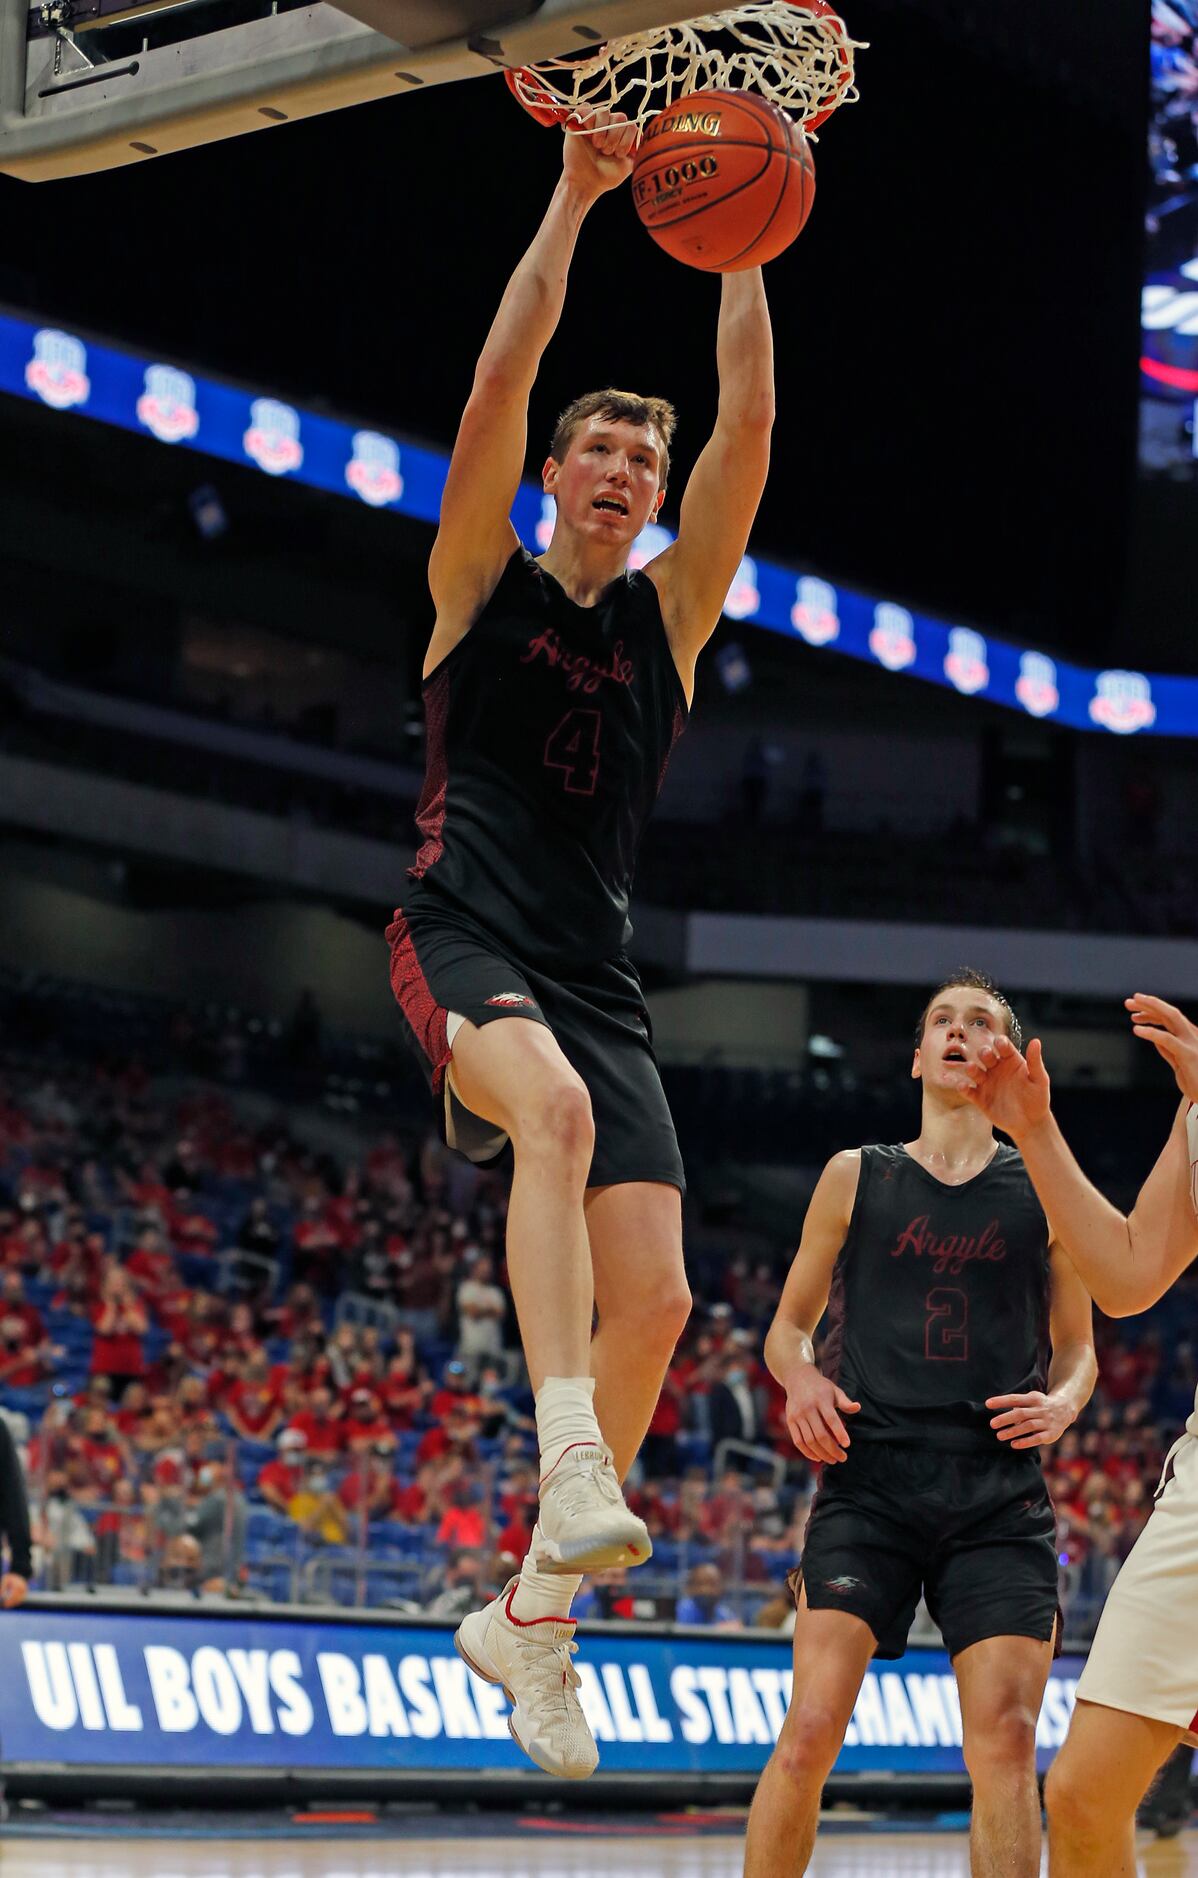 Argyle Nate Atwood #4 dunks against Hargrave. UIL boys Class 4A basketball state...